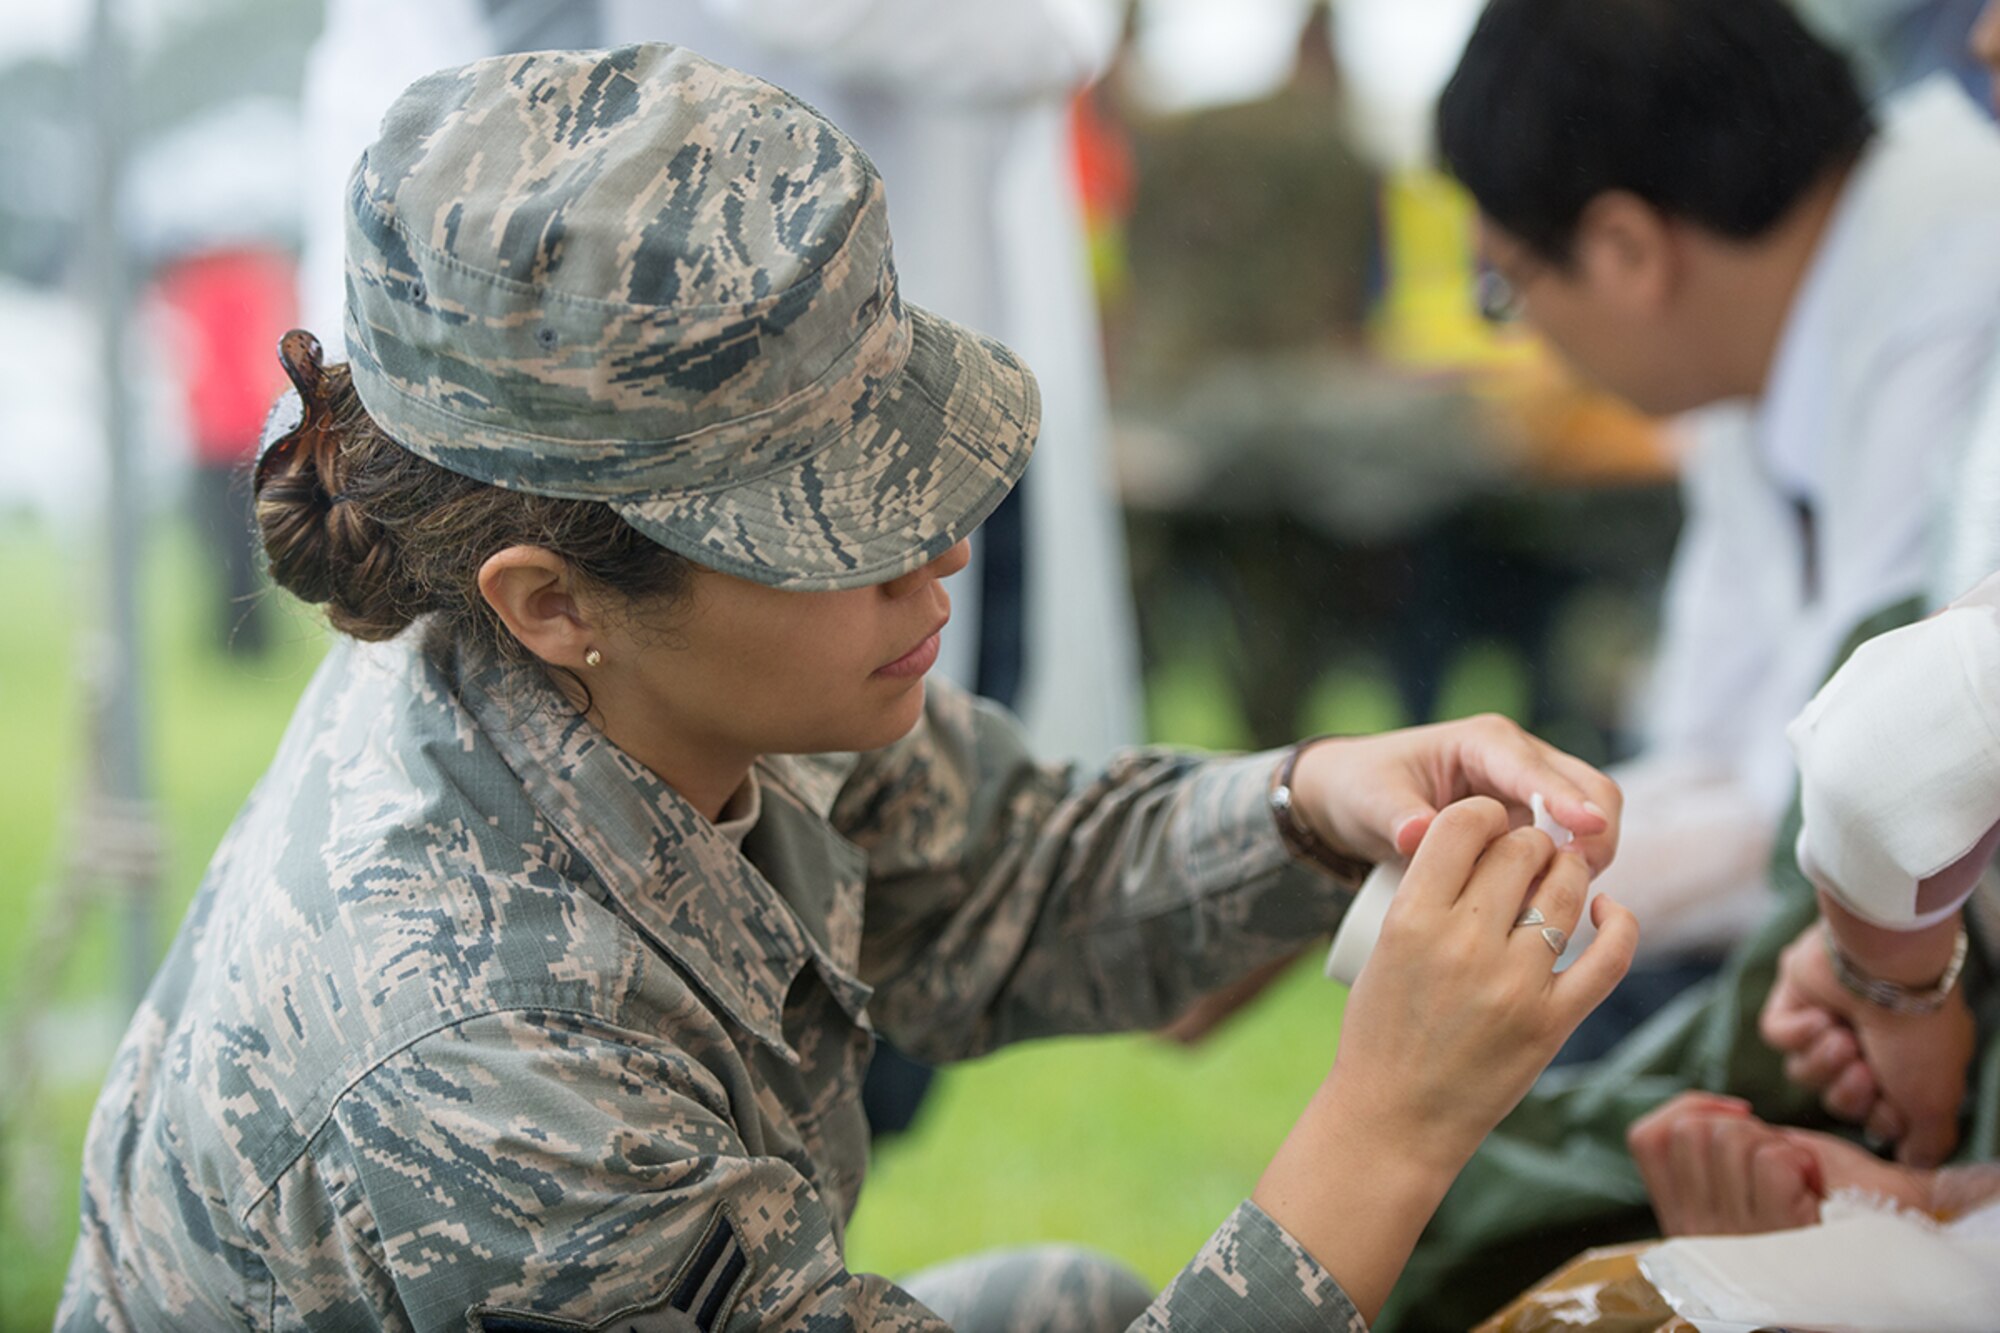 Airman 1st Class Samantha Trevino, 374th Aerospace Medicine Squadron medicine technician, treats the injuries of a simulated patient during the Kanagawa Prefecture Government Joint Disaster Drill at Japan Ground Self-Defense Force Camp Takeyama, Japan, Sept. 11, 2016. Yokota Airmen have participated in the drill since 2014 in an effort to enhance emergency response capabilities with the Japan Self-Defense Force and local Japanese emergency response organizations. (U.S. Air Force photo by Senior Airman Delano Scott/Released)